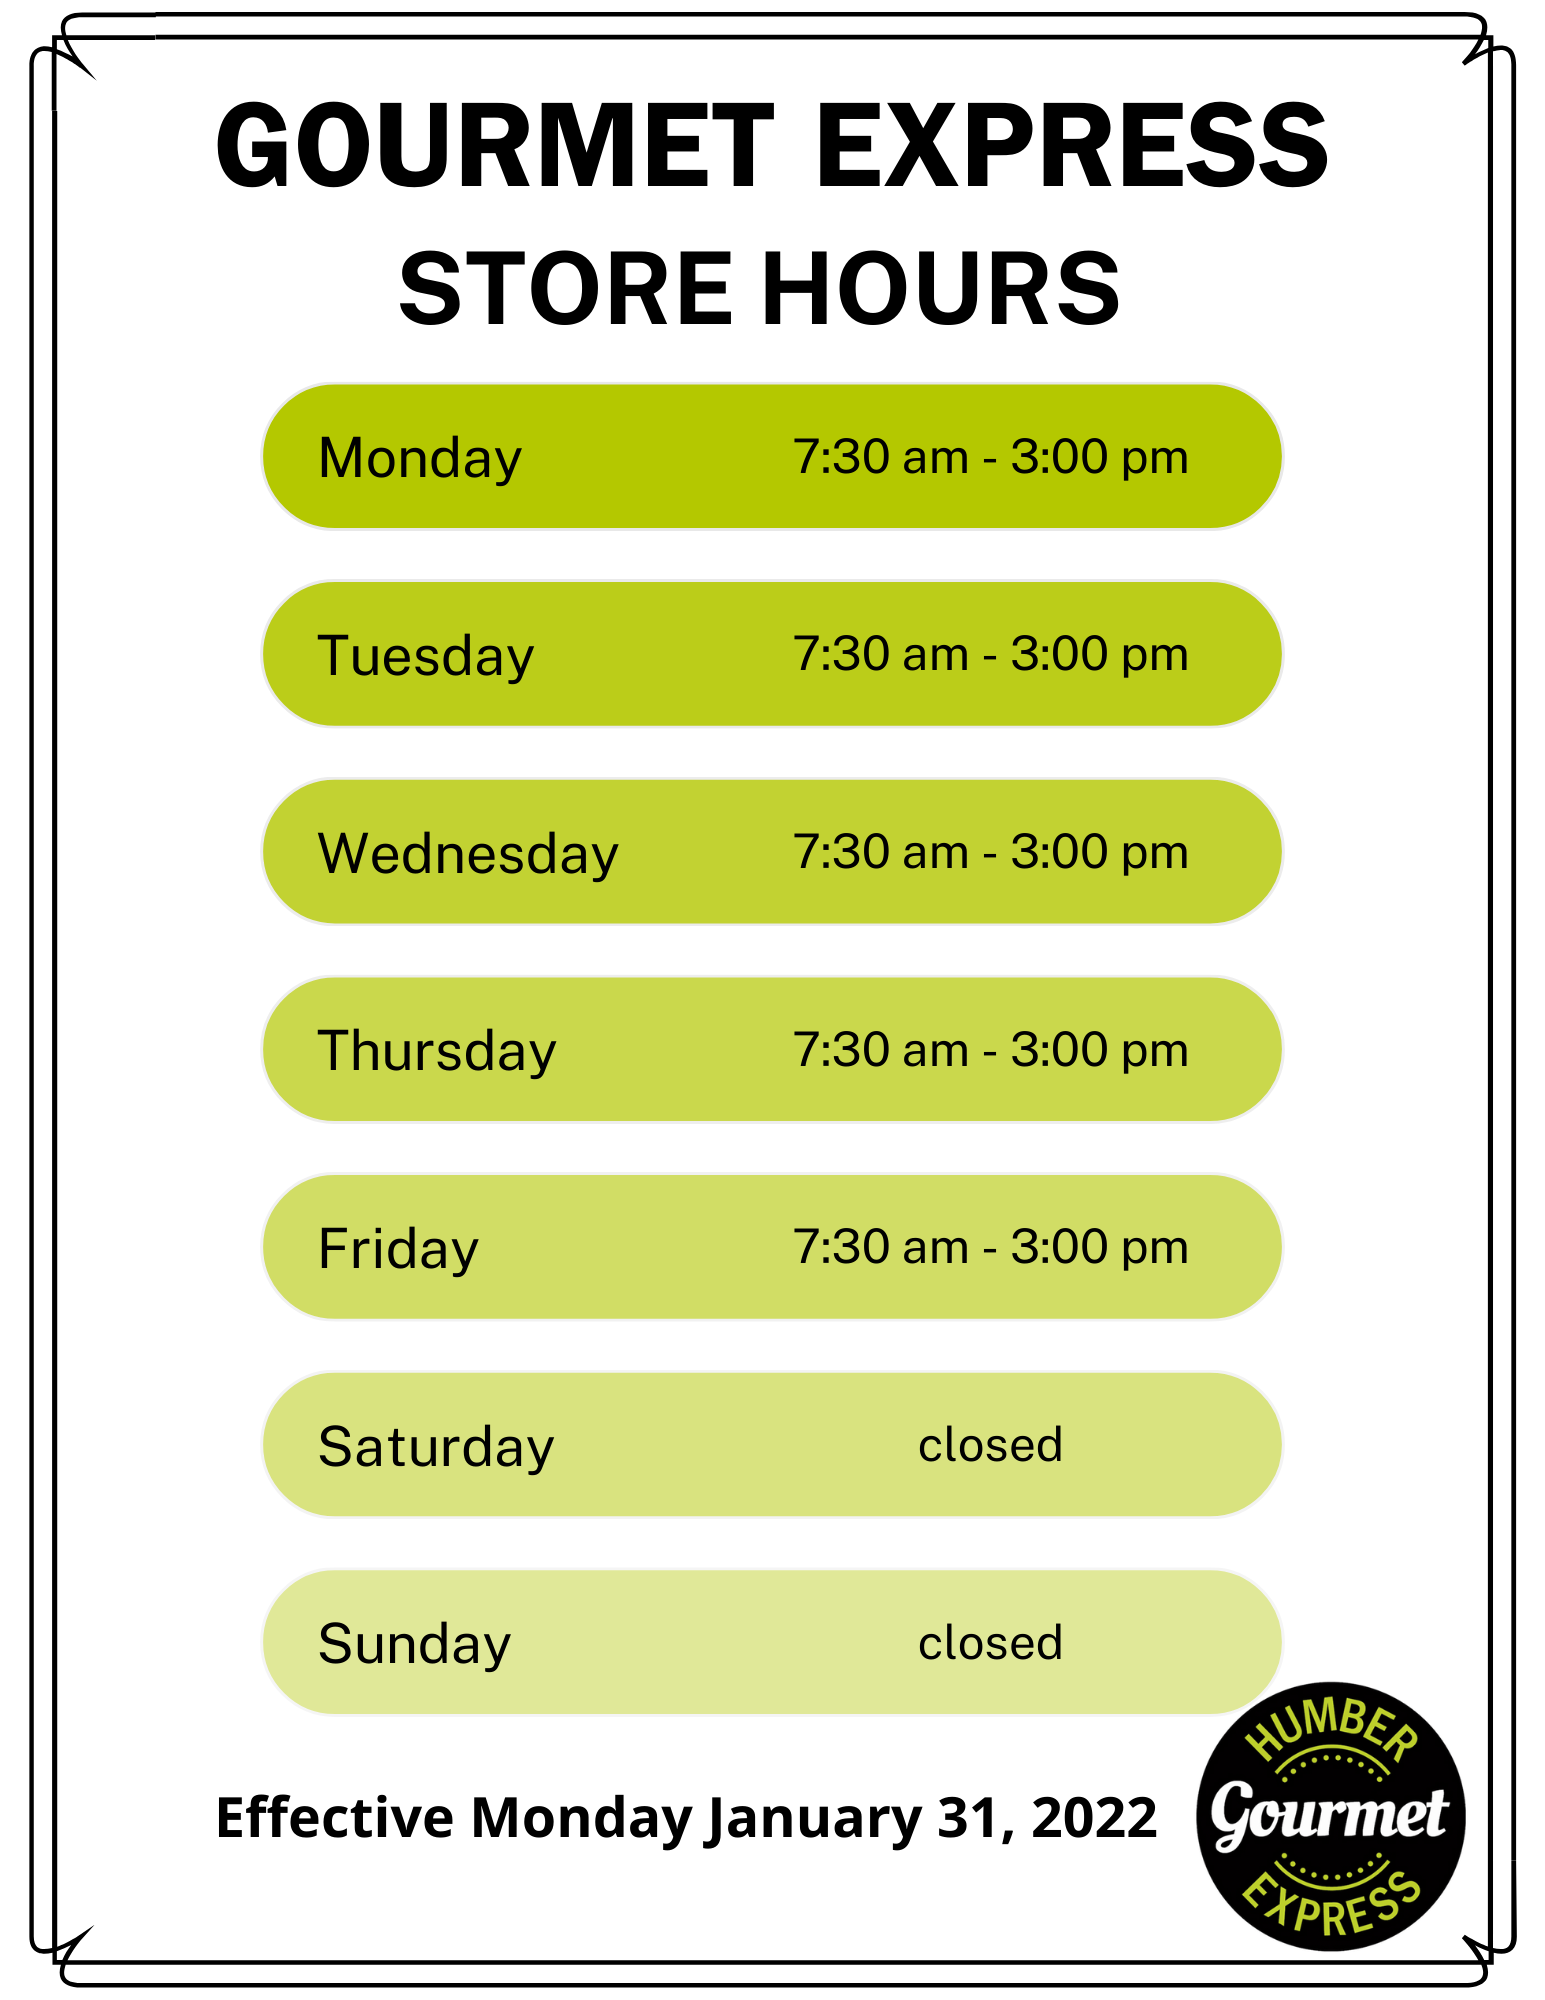 Gourmet Express store hours starting January 31. 